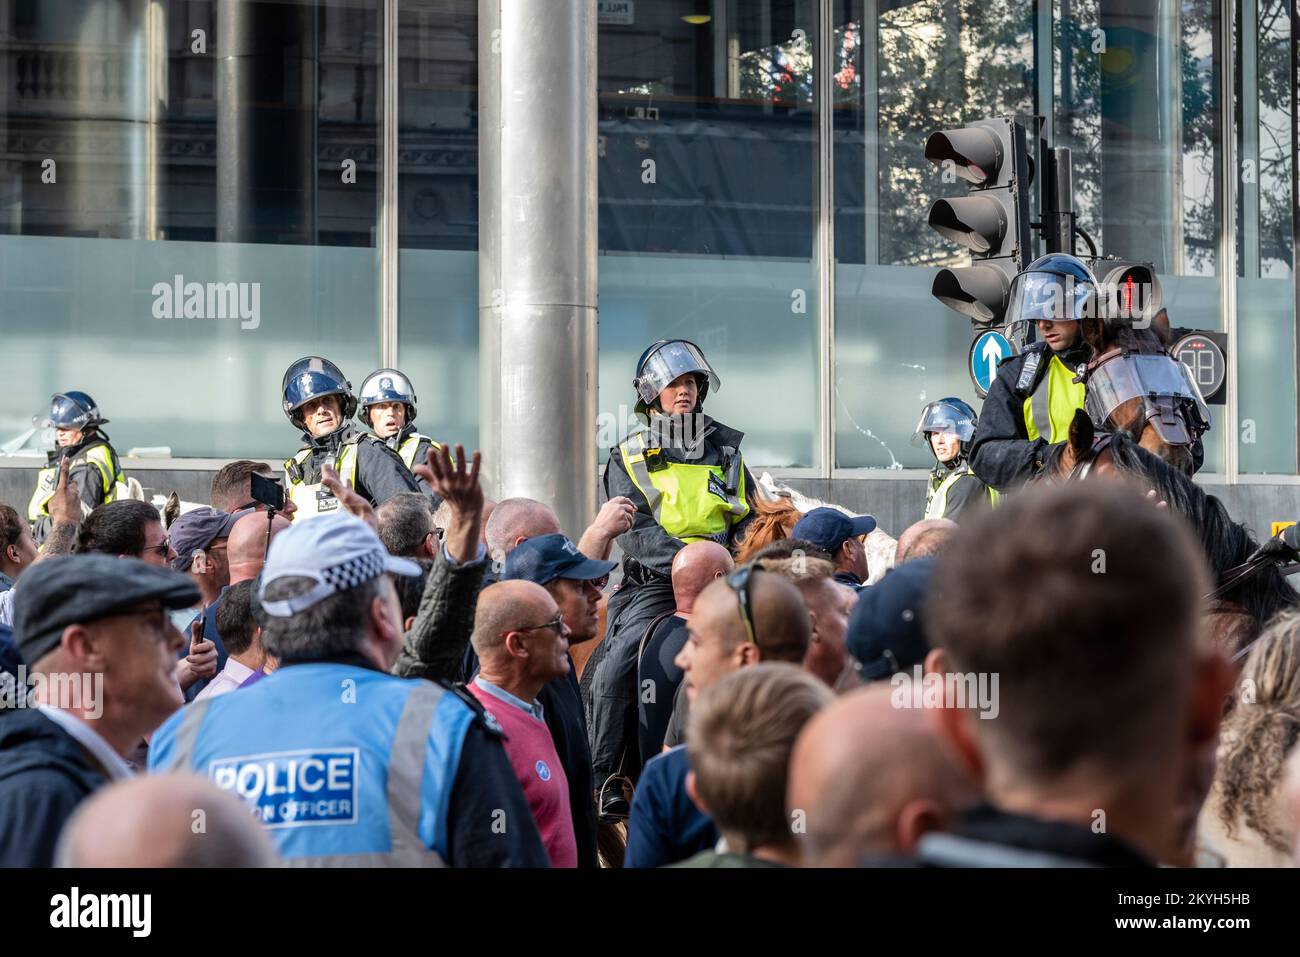 Democratic Football Lads Alliance, DFLA, march in London, UK, in a protest demonstration. Breaking through police cordon. Mounted police holding line Stock Photo